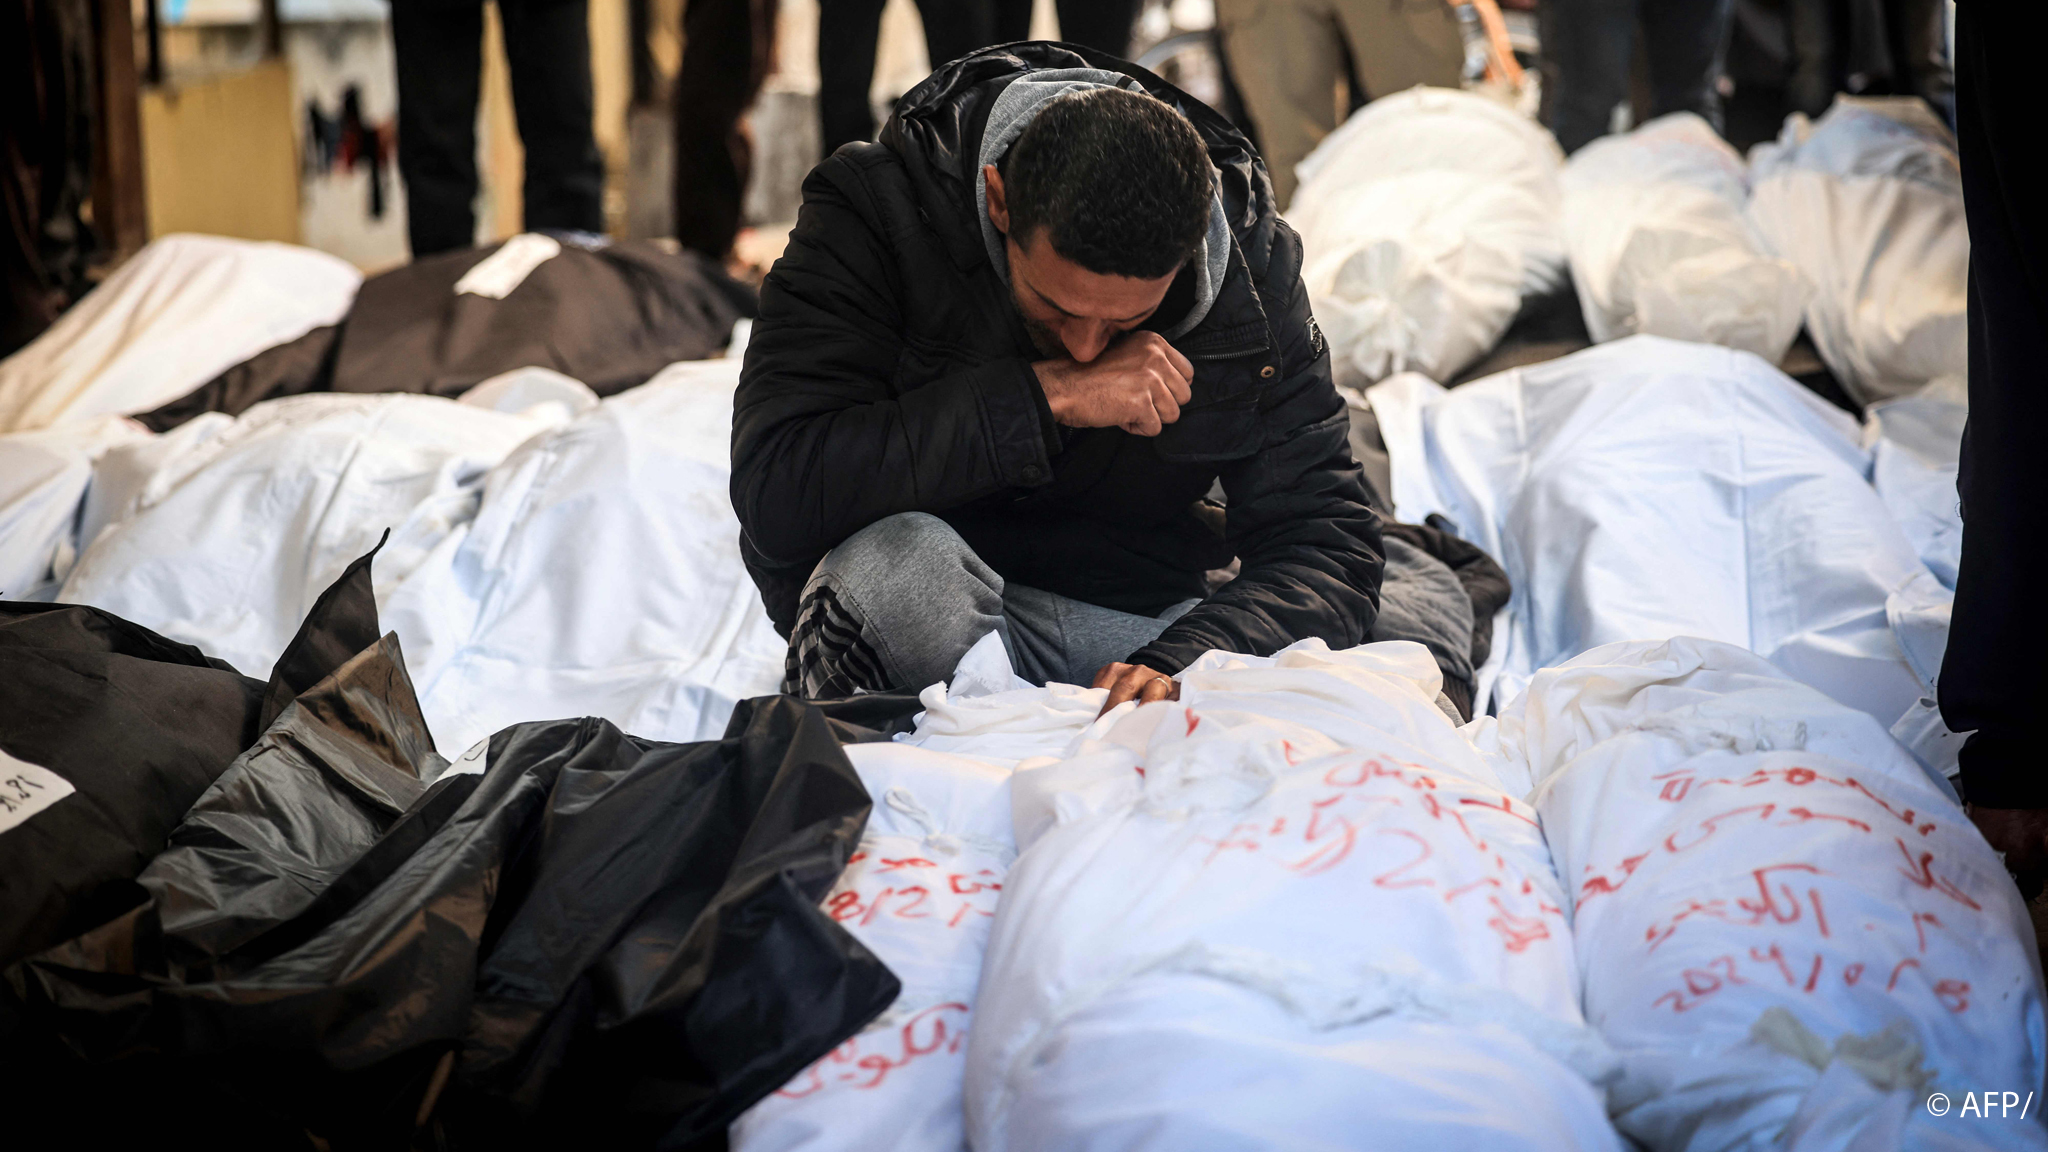 A Palestinian man mourns over shrouded bodies of relatives killed in overnight Israeli bombardment on the southern Gaza Strip at hospital in Rafah